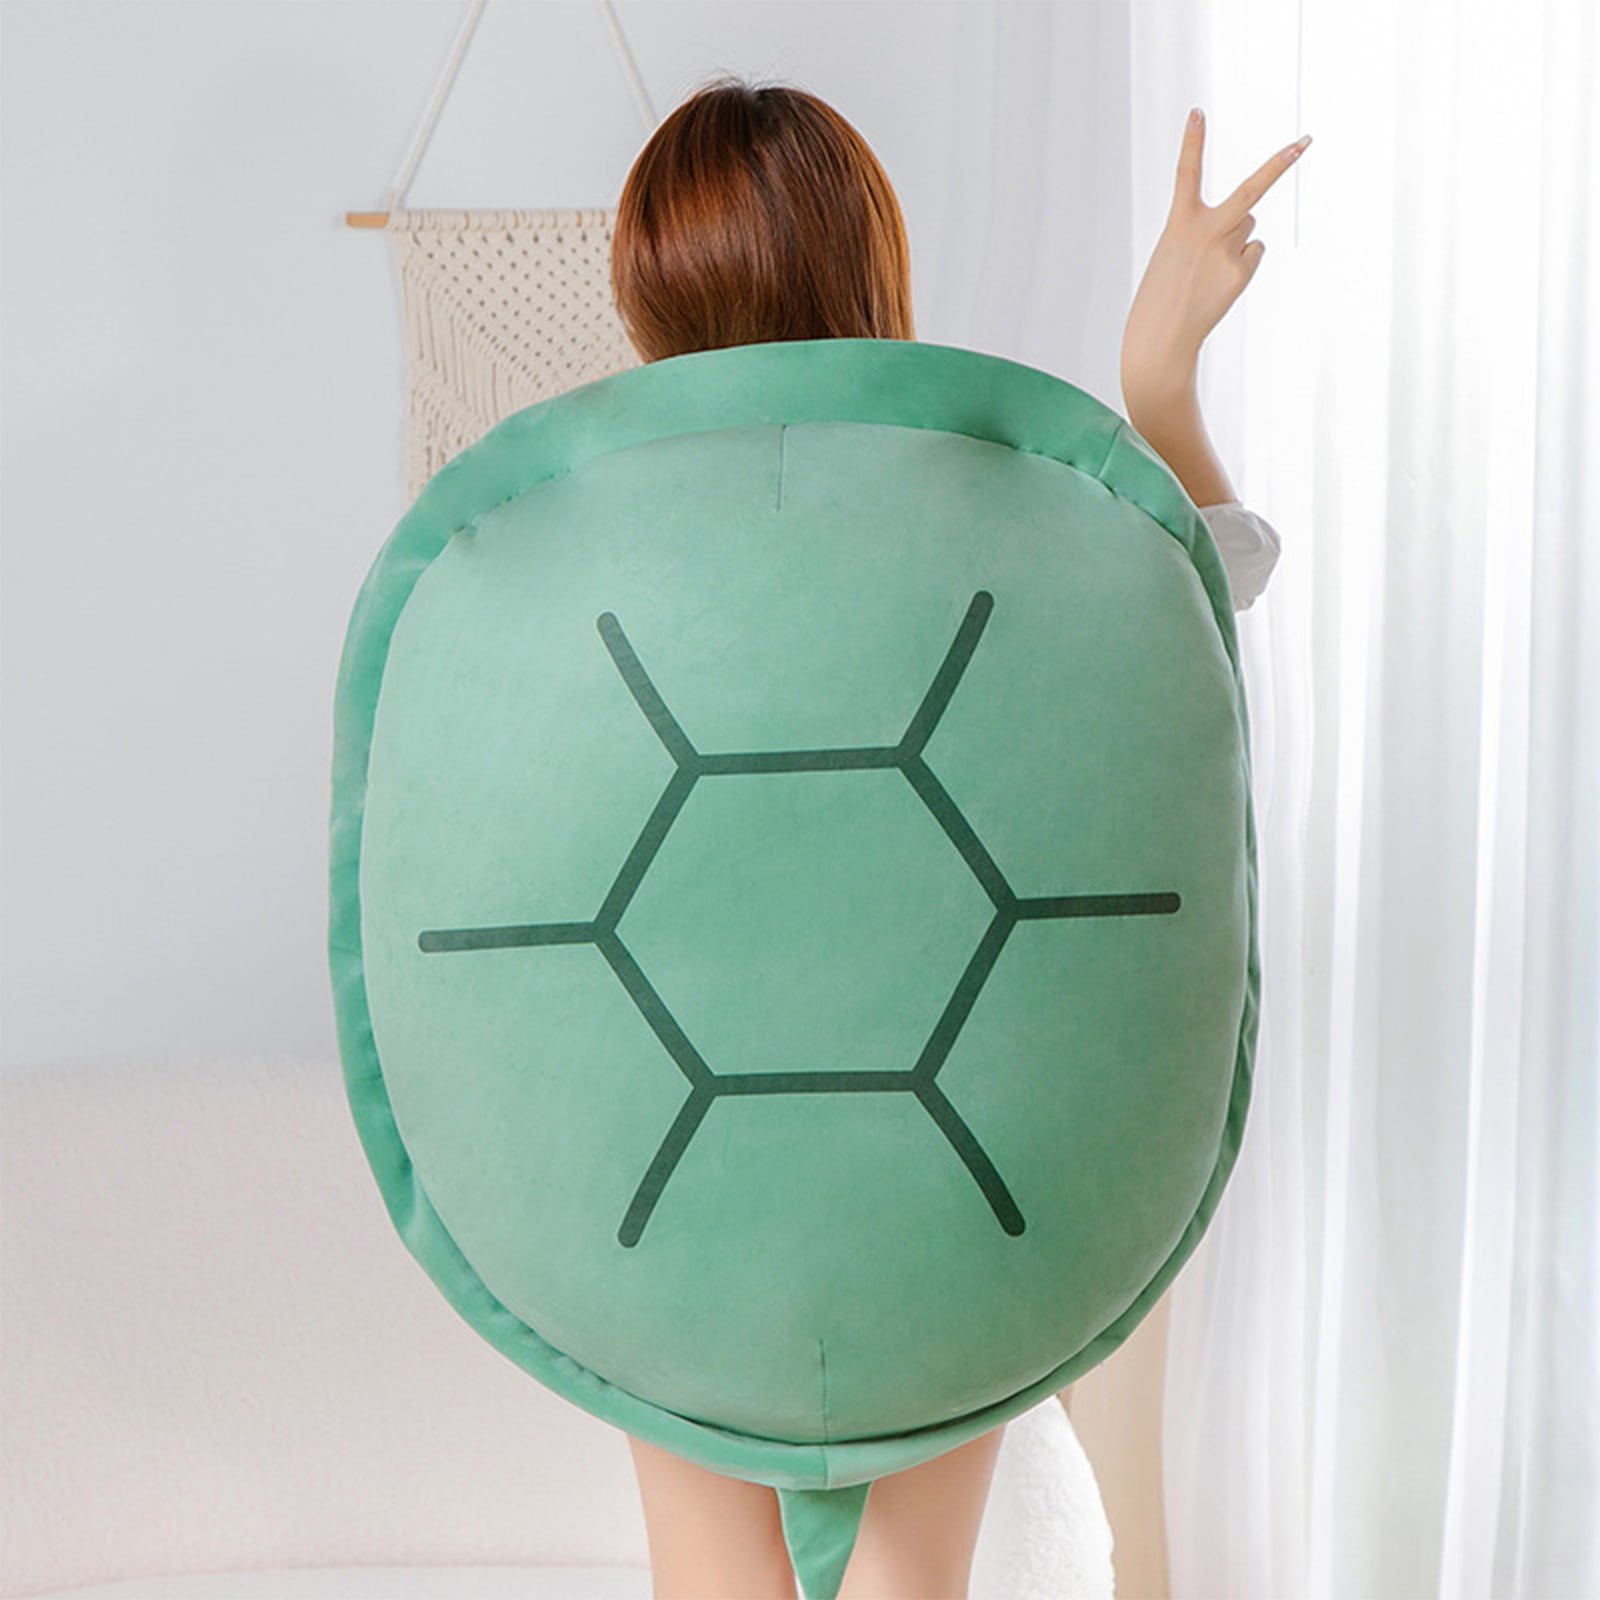 Turtle Shell Wearable Plush Toy Pillow Doll Pajamas Pillow